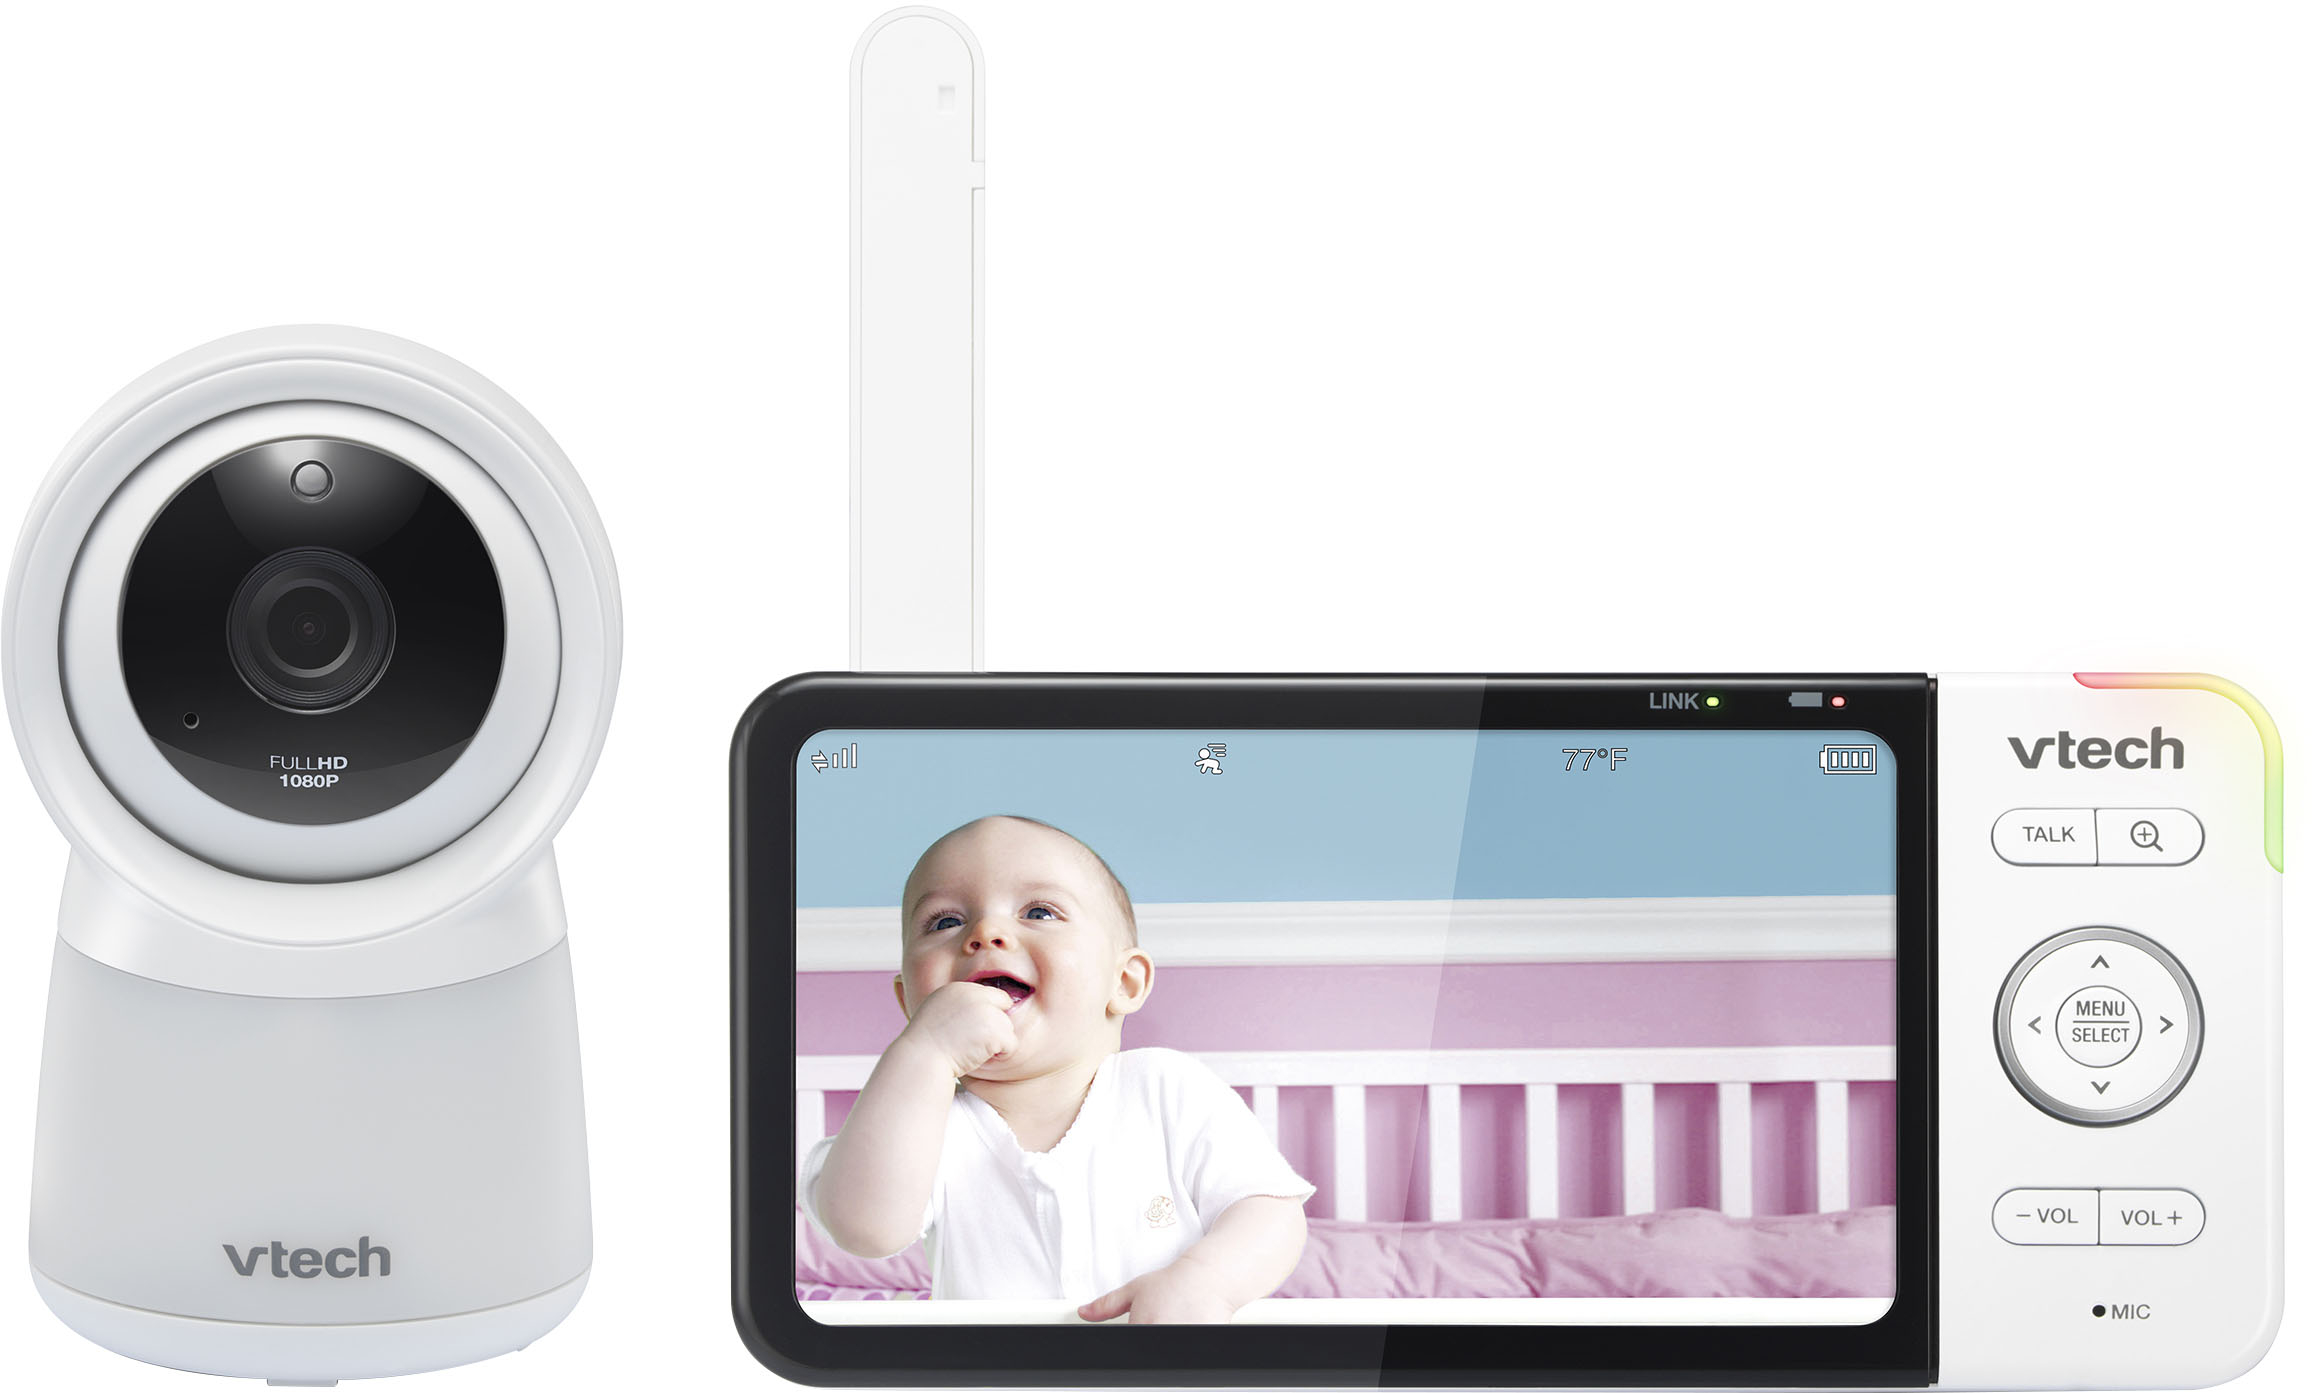 Left View: VTech - Smart Wi-Fi Video Baby Monitor w/ 5” HC Display and 1080p HD Camera, Built-in night light, RM5754HD - White